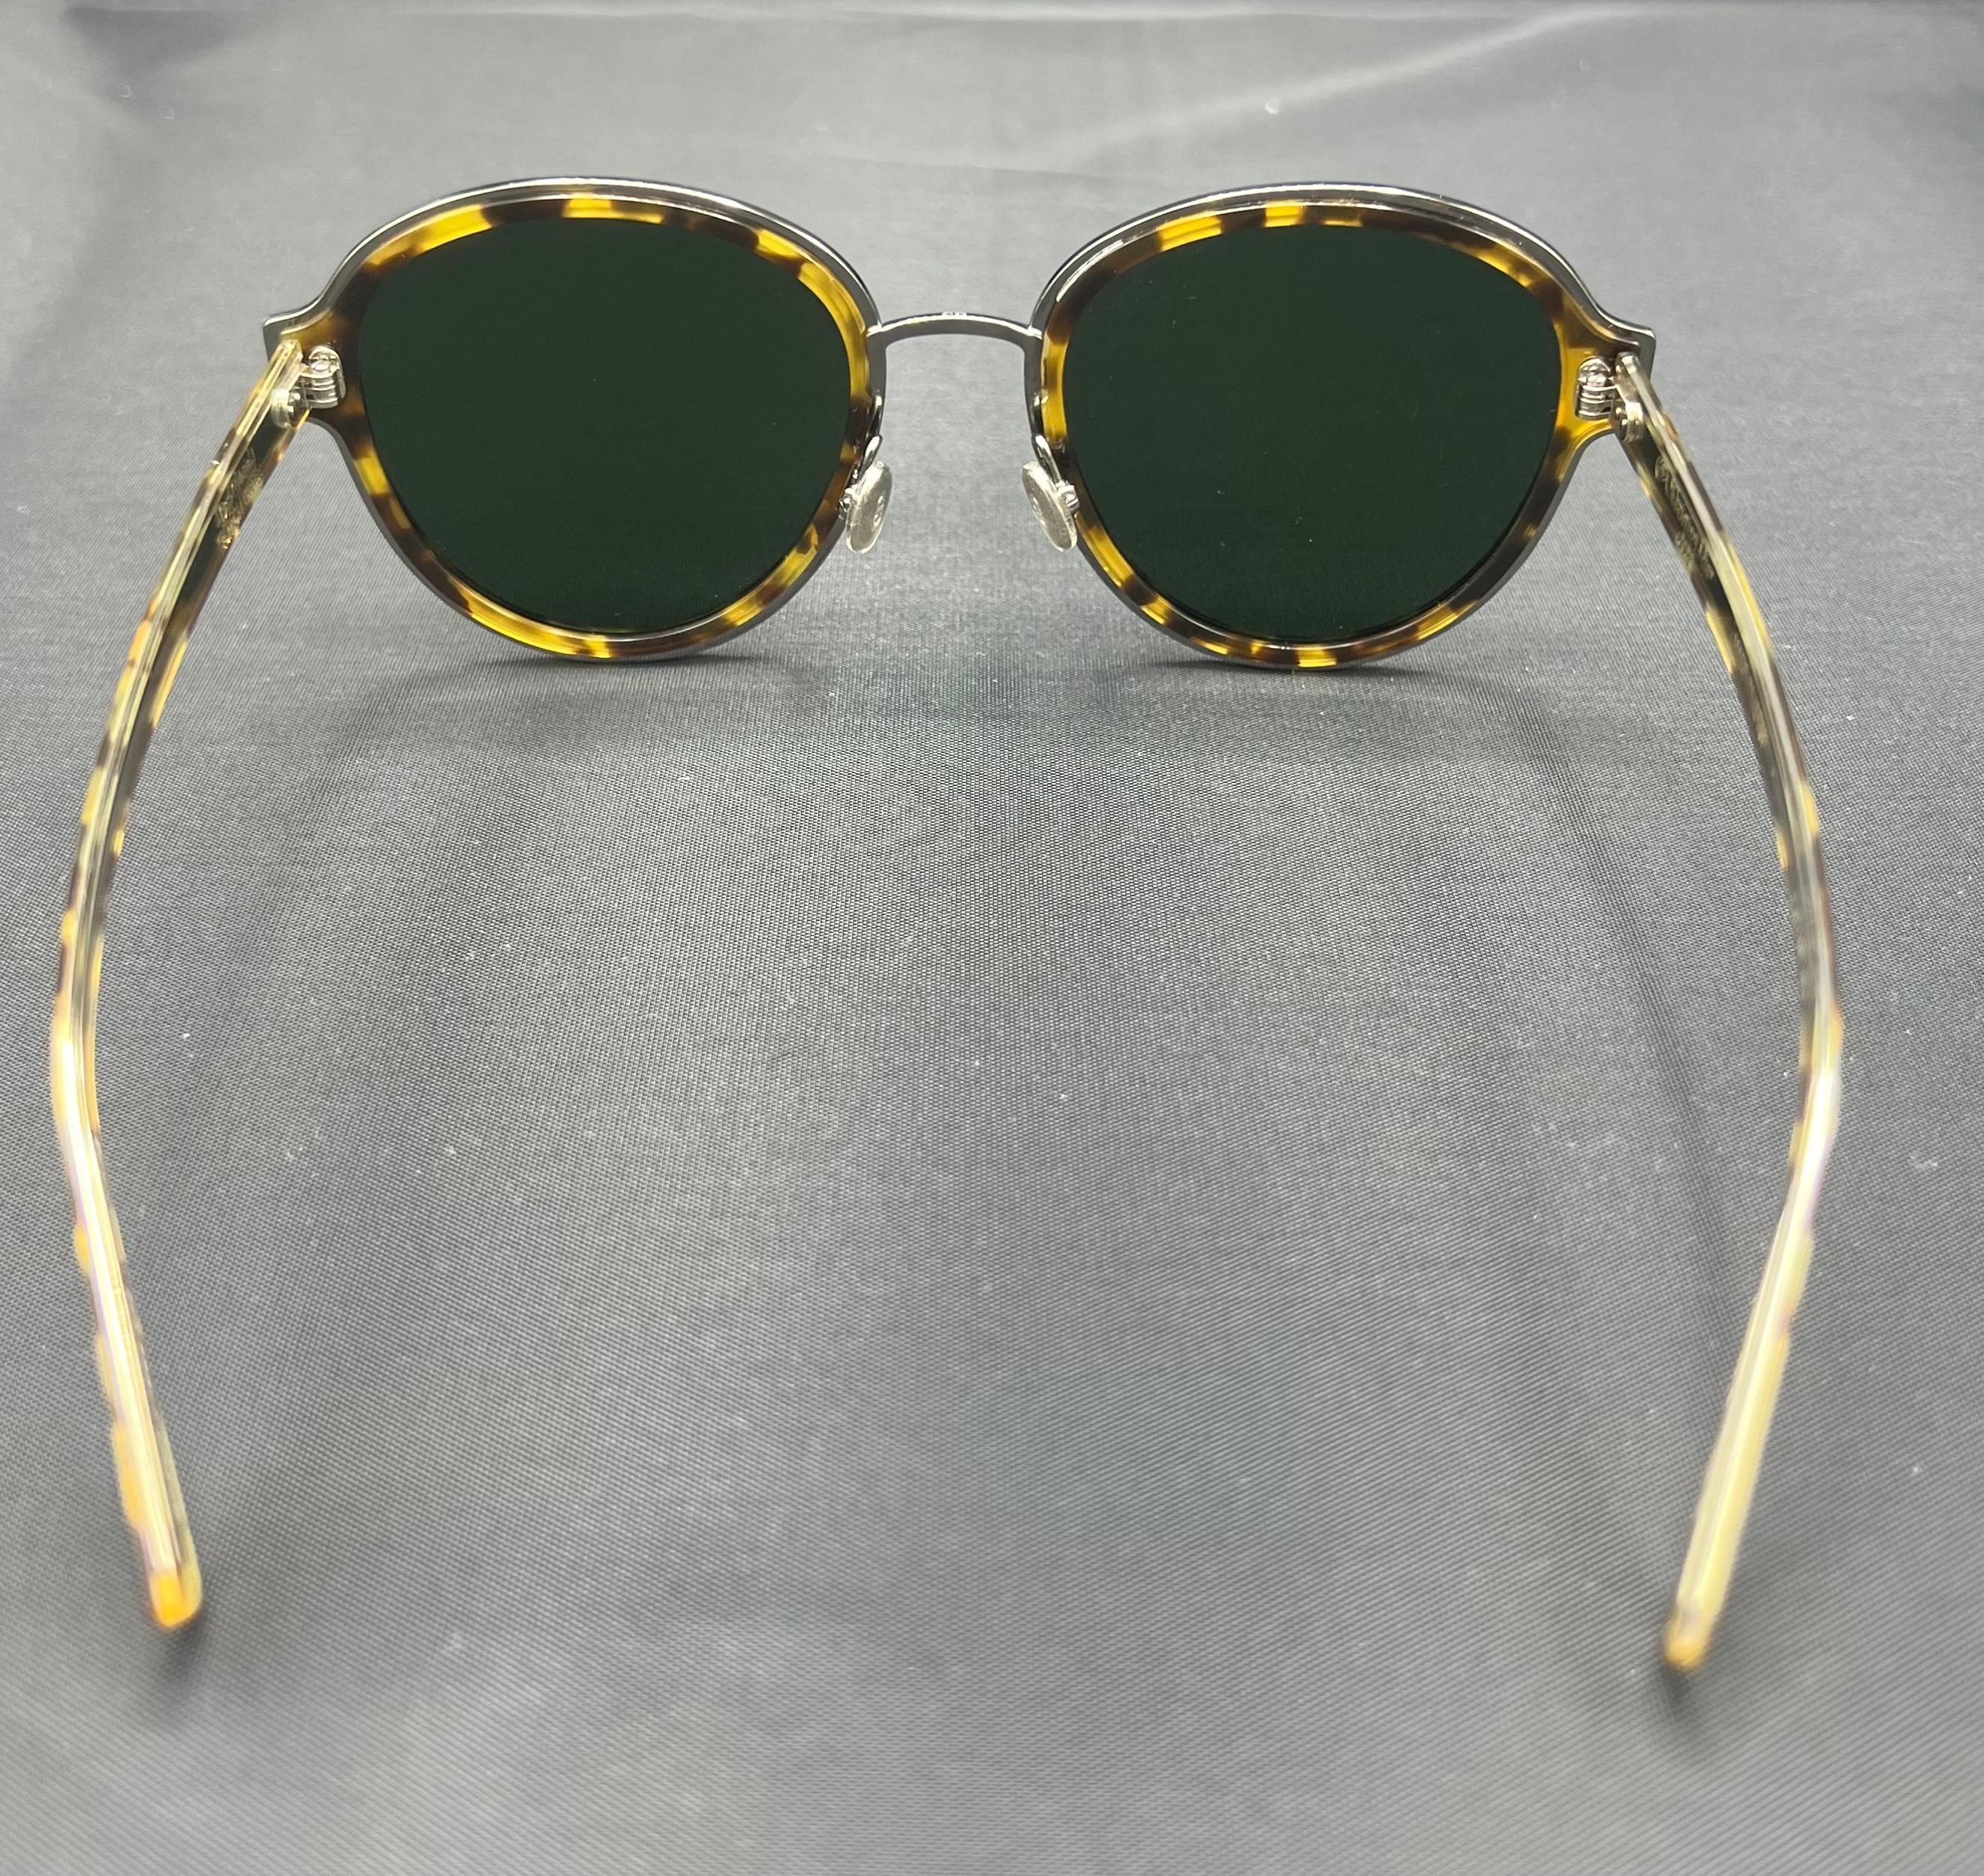 Christian Dior Round Tortoise Sunglasses In Excellent Condition For Sale In Beverly Hills, CA